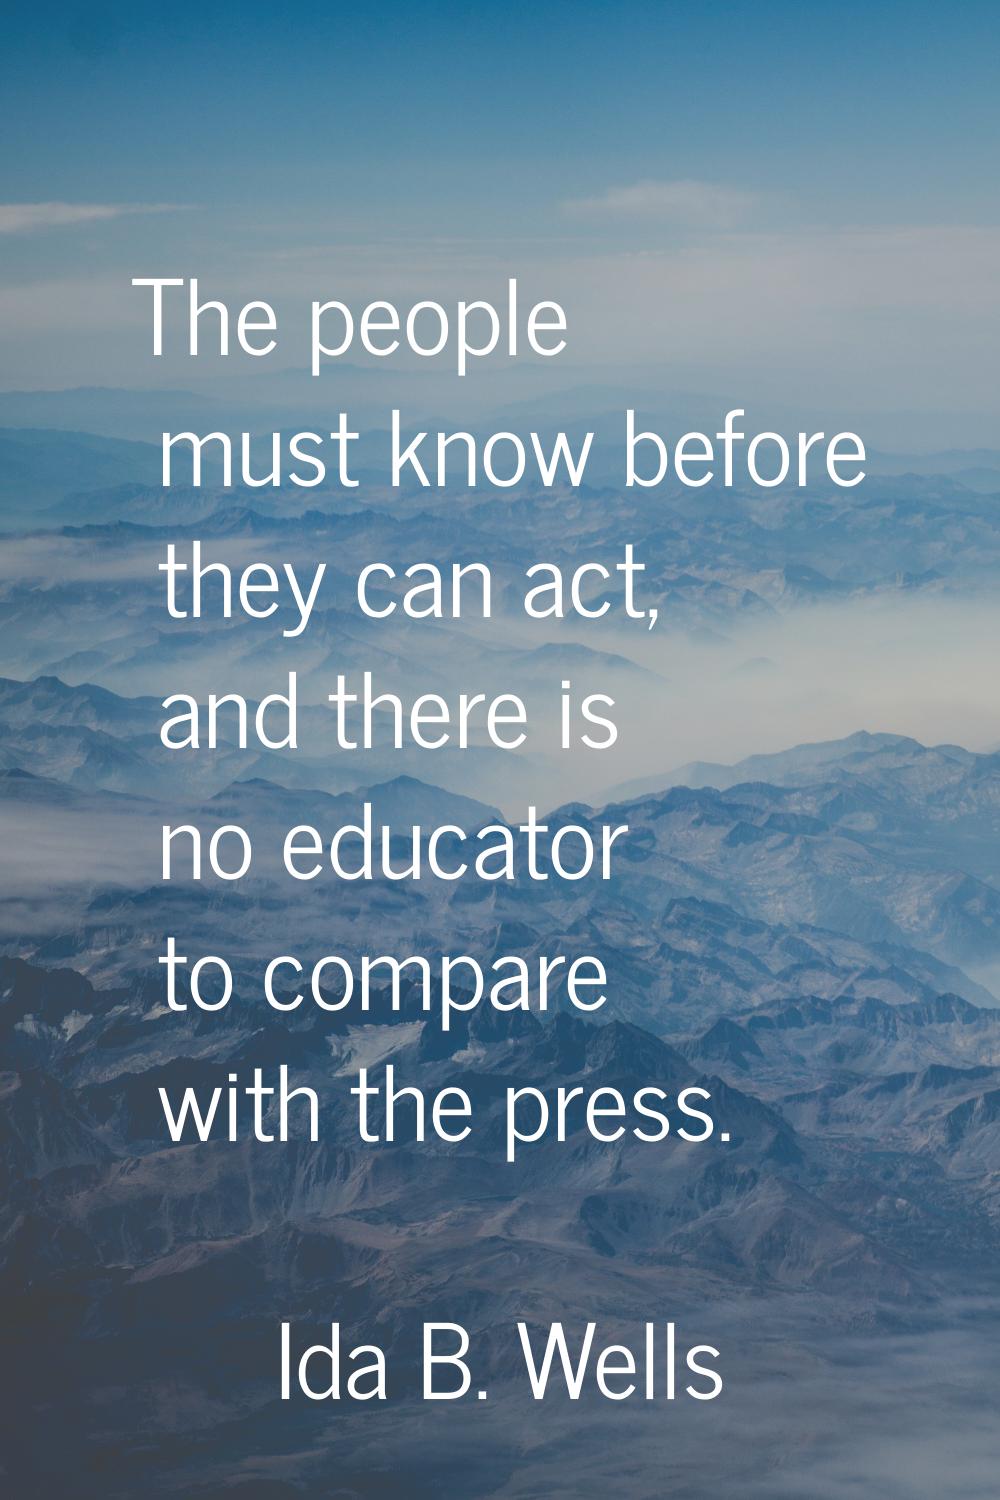 The people must know before they can act, and there is no educator to compare with the press.